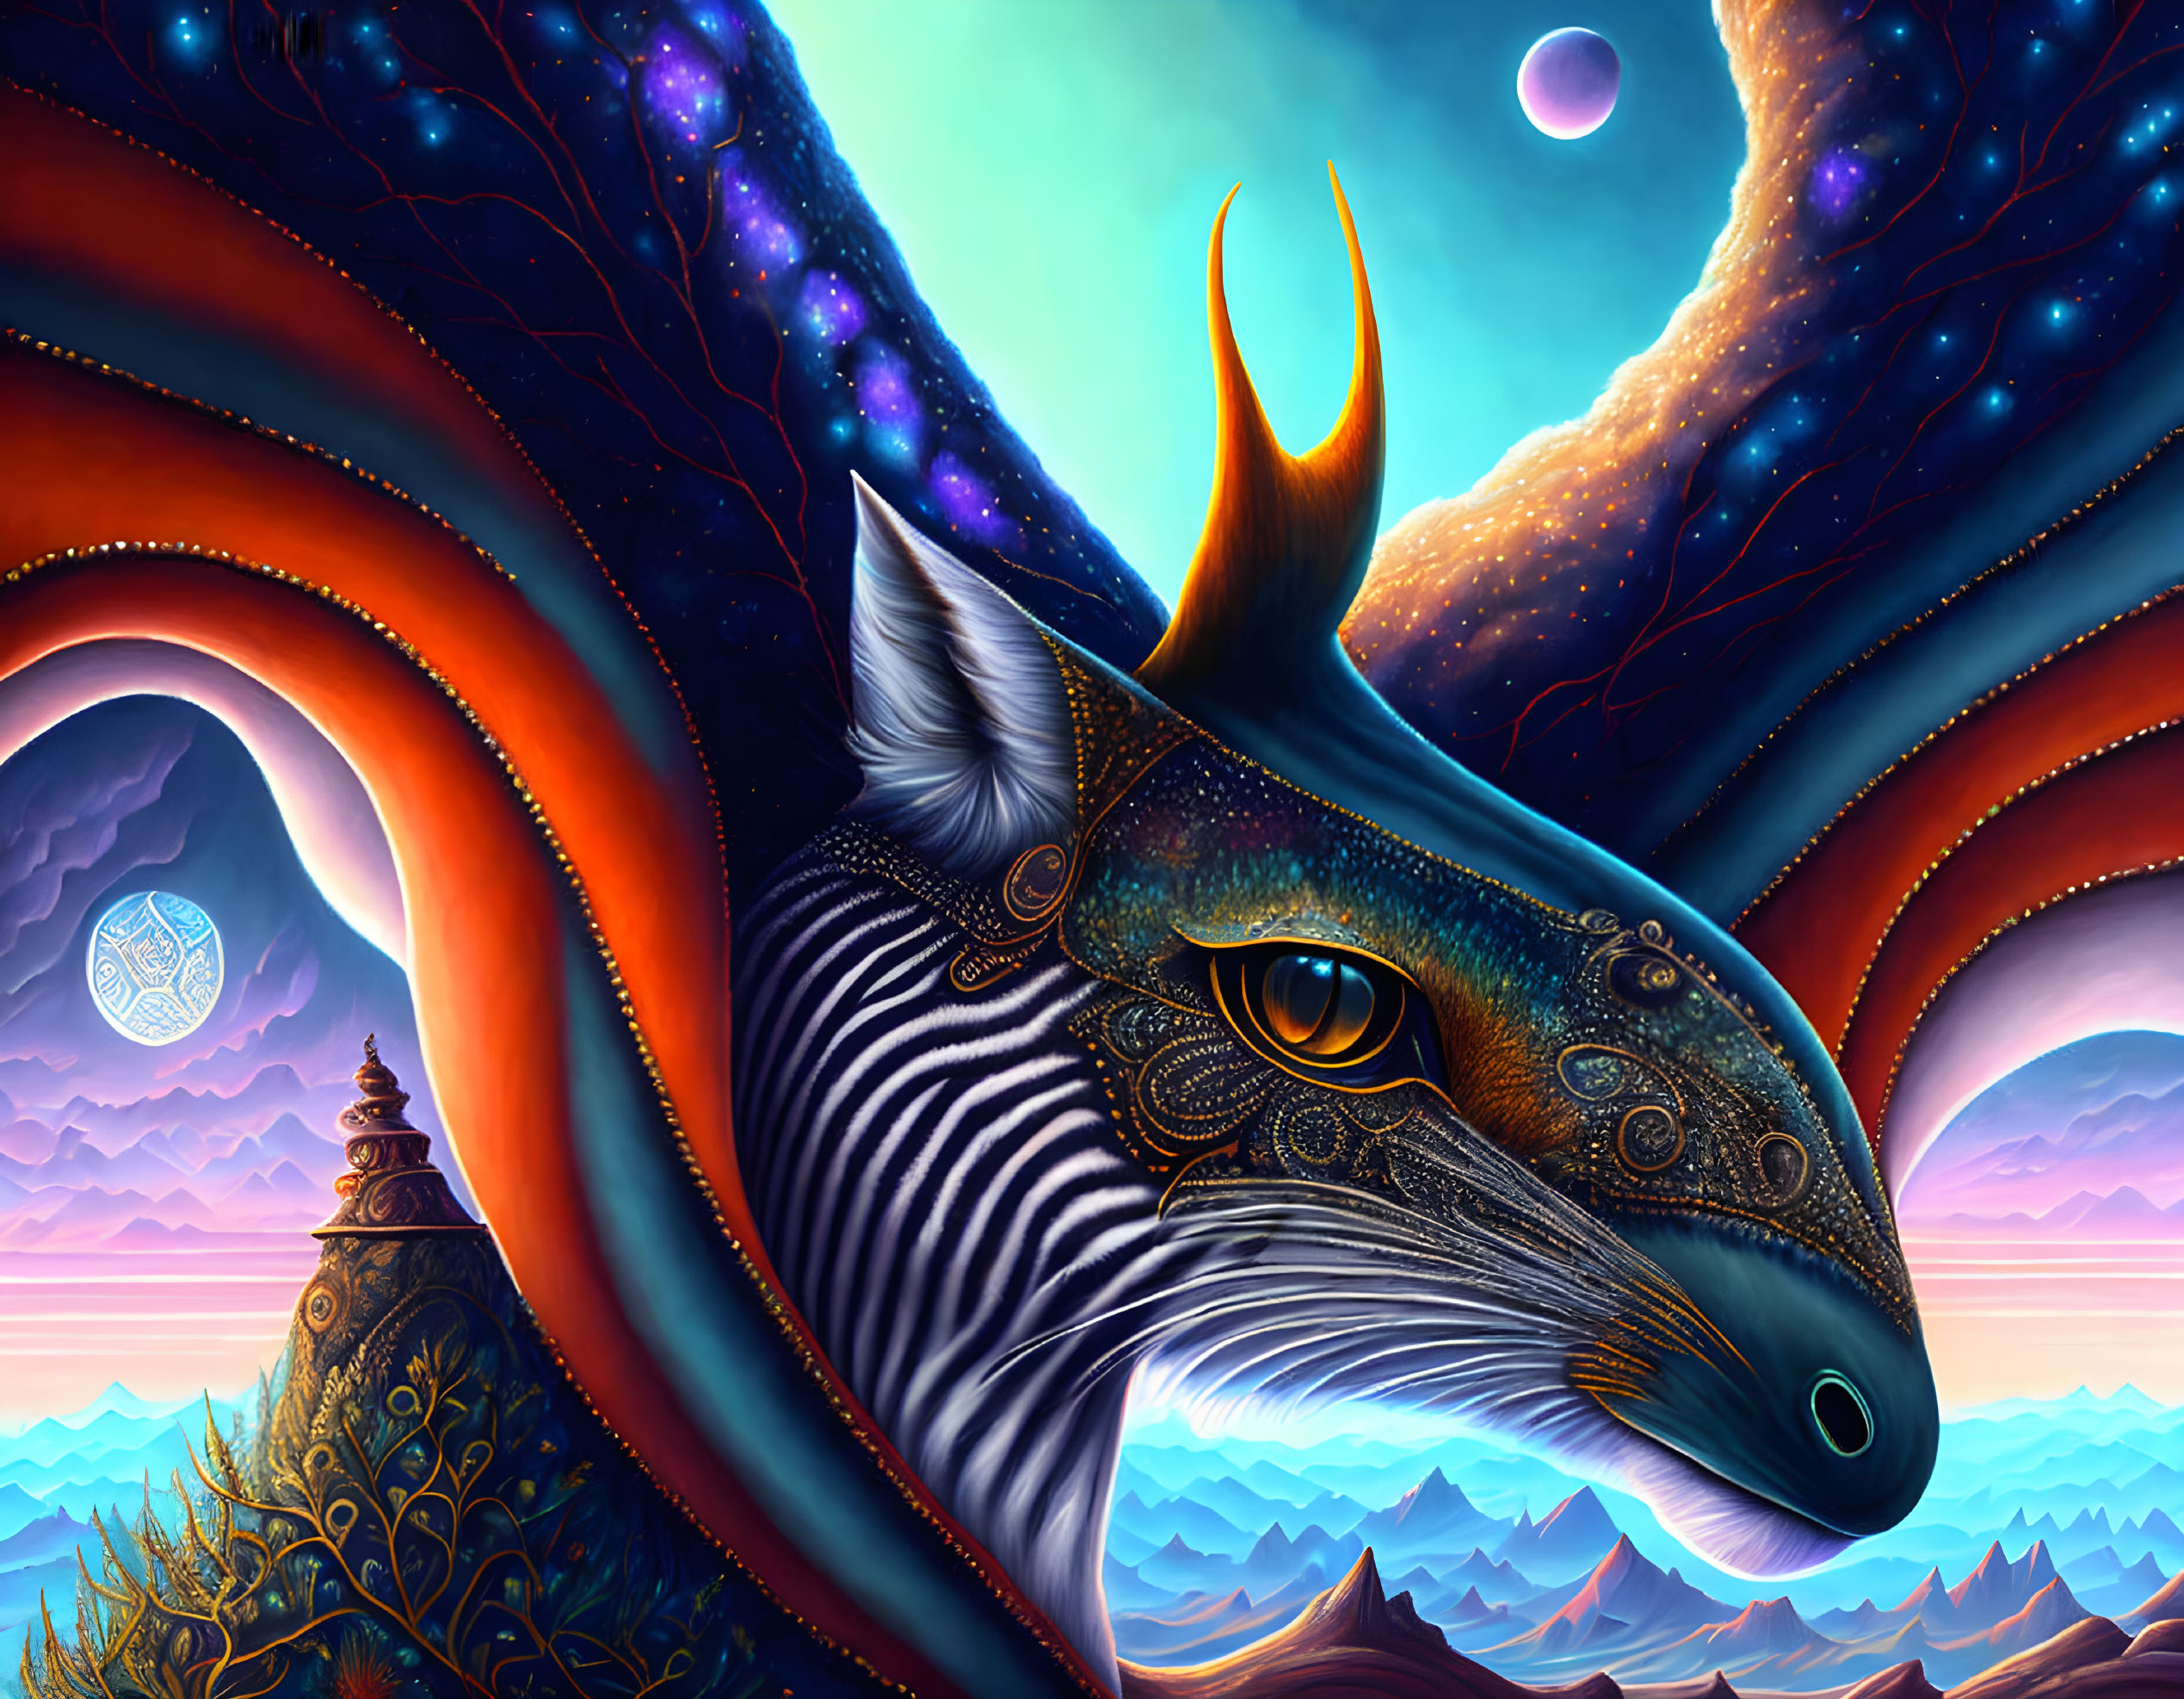 Colorful Fantasy Dragon-Like Creature with Ornate Horns and Intricate Markings against Mountainous